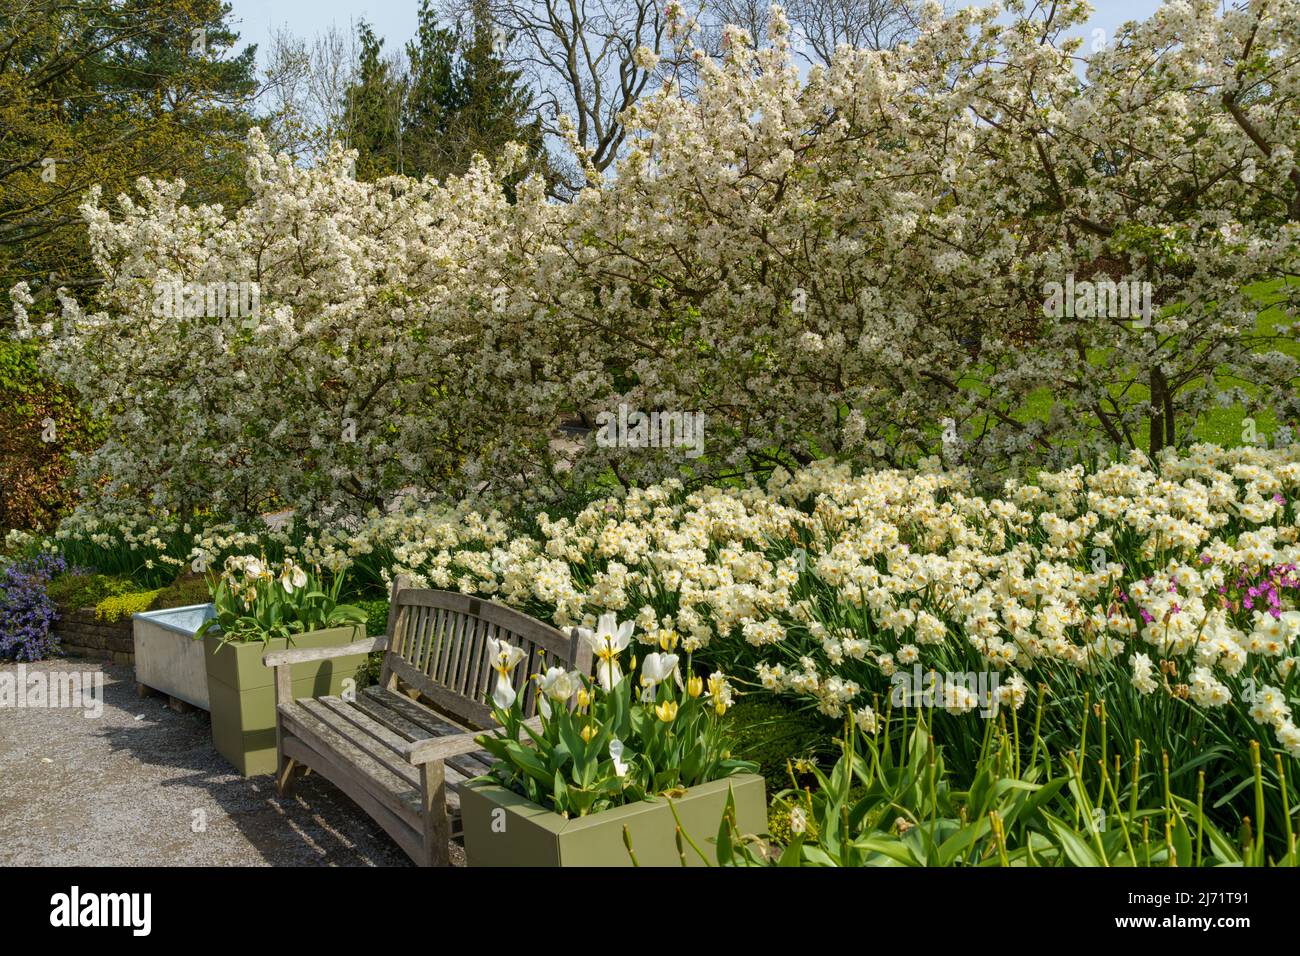 Spectacular floral display of  white Crab Apple Blossom and Daffodils with a vacant wooden bench next to a garden path,RHS Garden ,Harlow Carr. Stock Photo